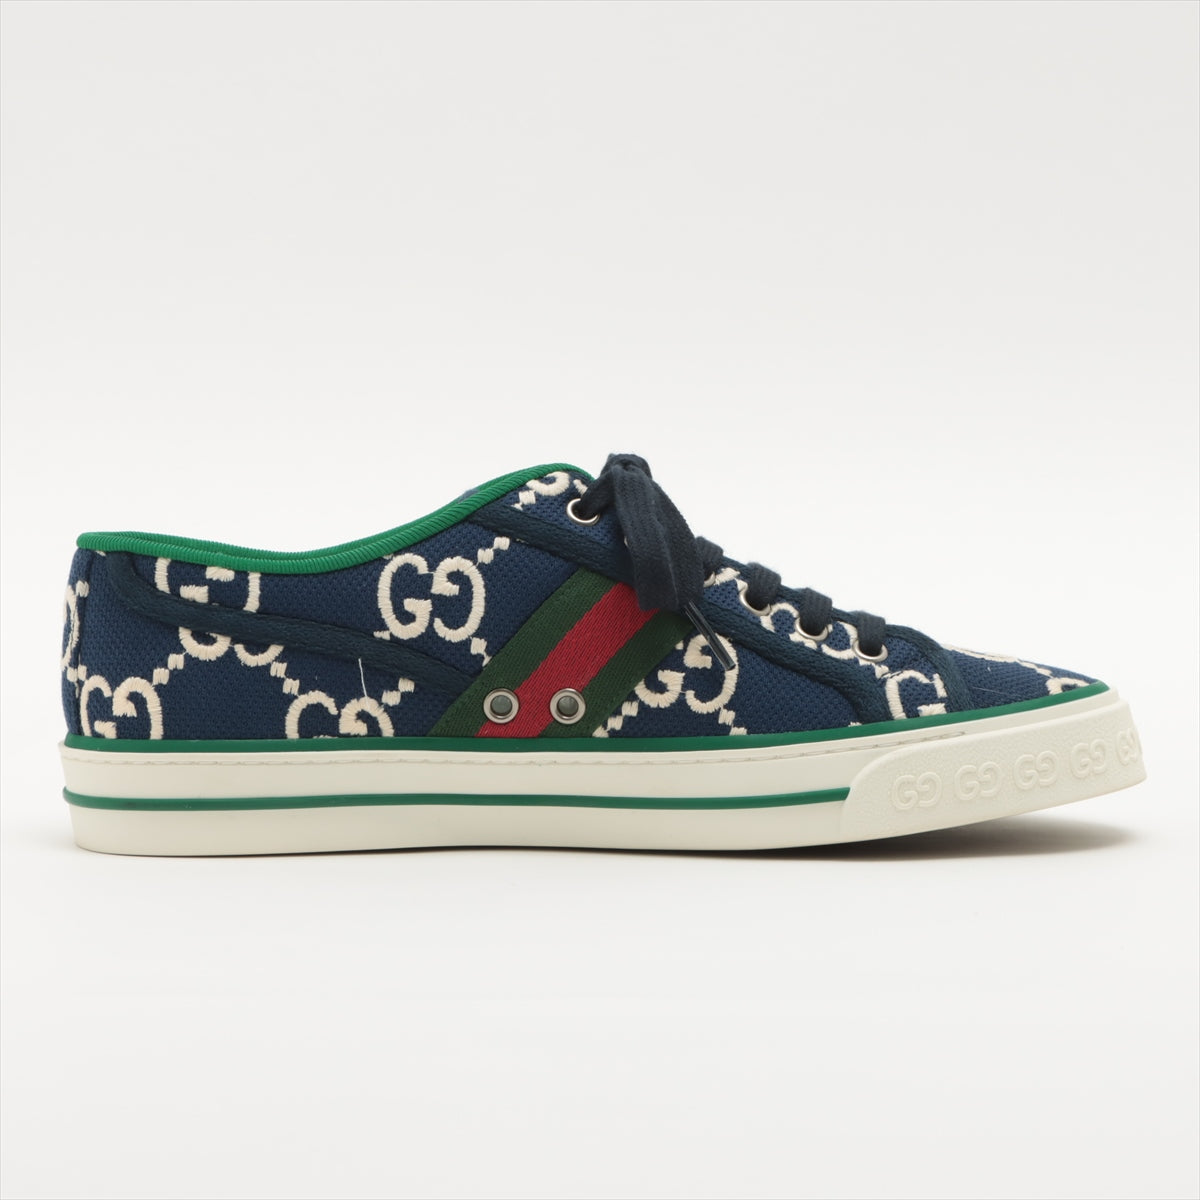 Gucci canvass Sneakers 6 Men's Navy blue Tennis 1977